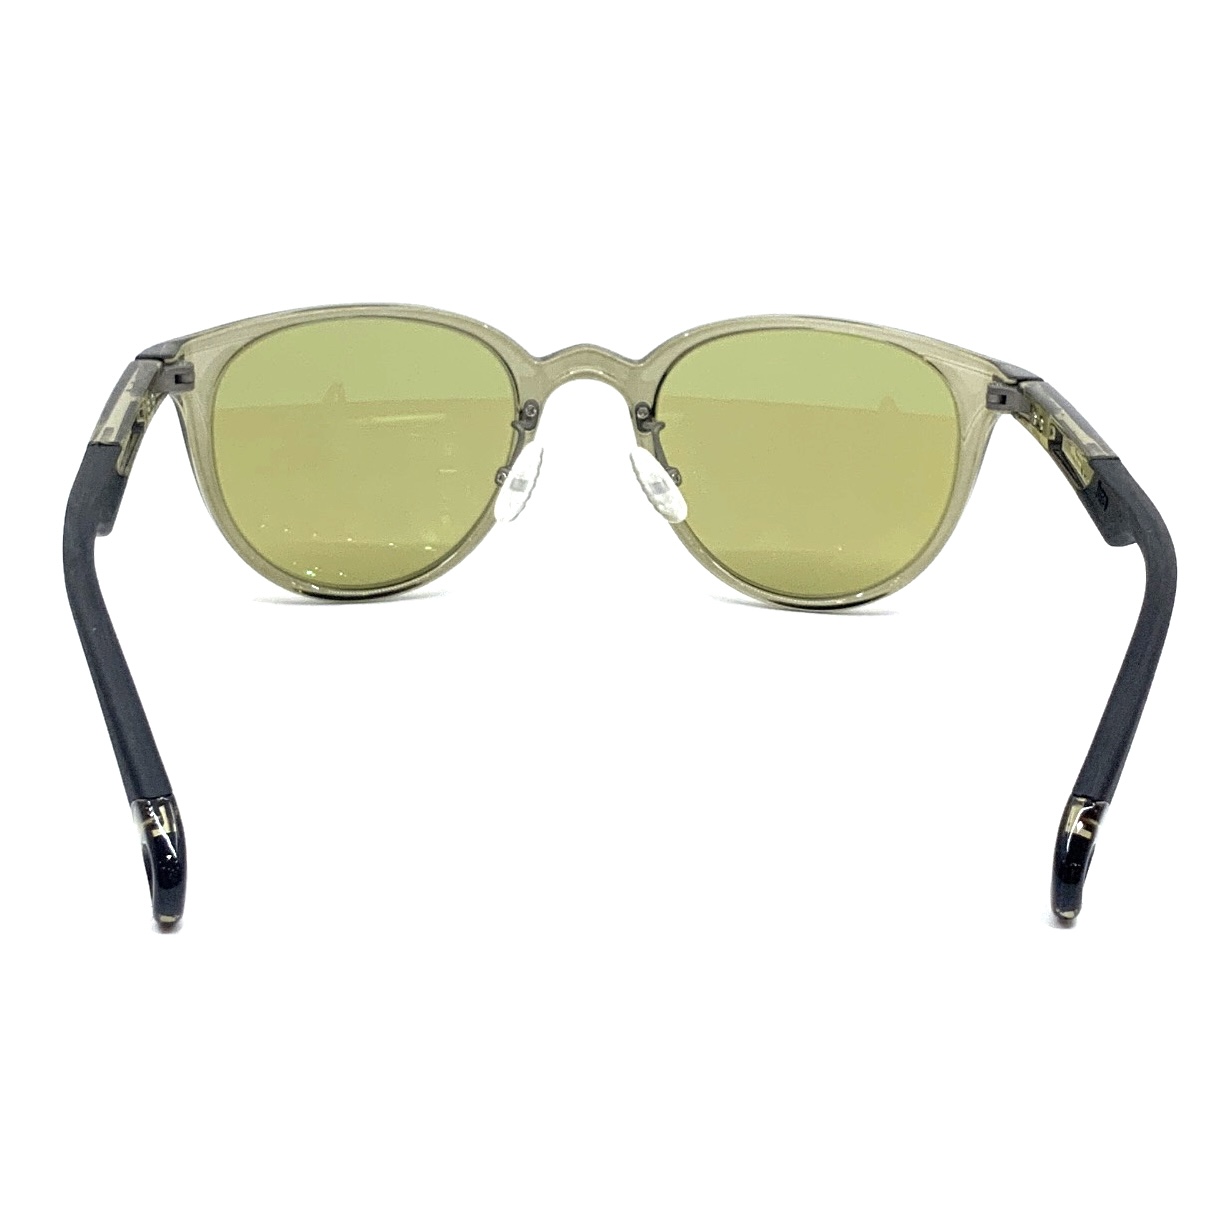 Zeque ゼクー サングラス Juno ジュノ F-1847 Clear Olive / EASE GREEN / BLUE MIRROR  47サイズ (在庫なし)